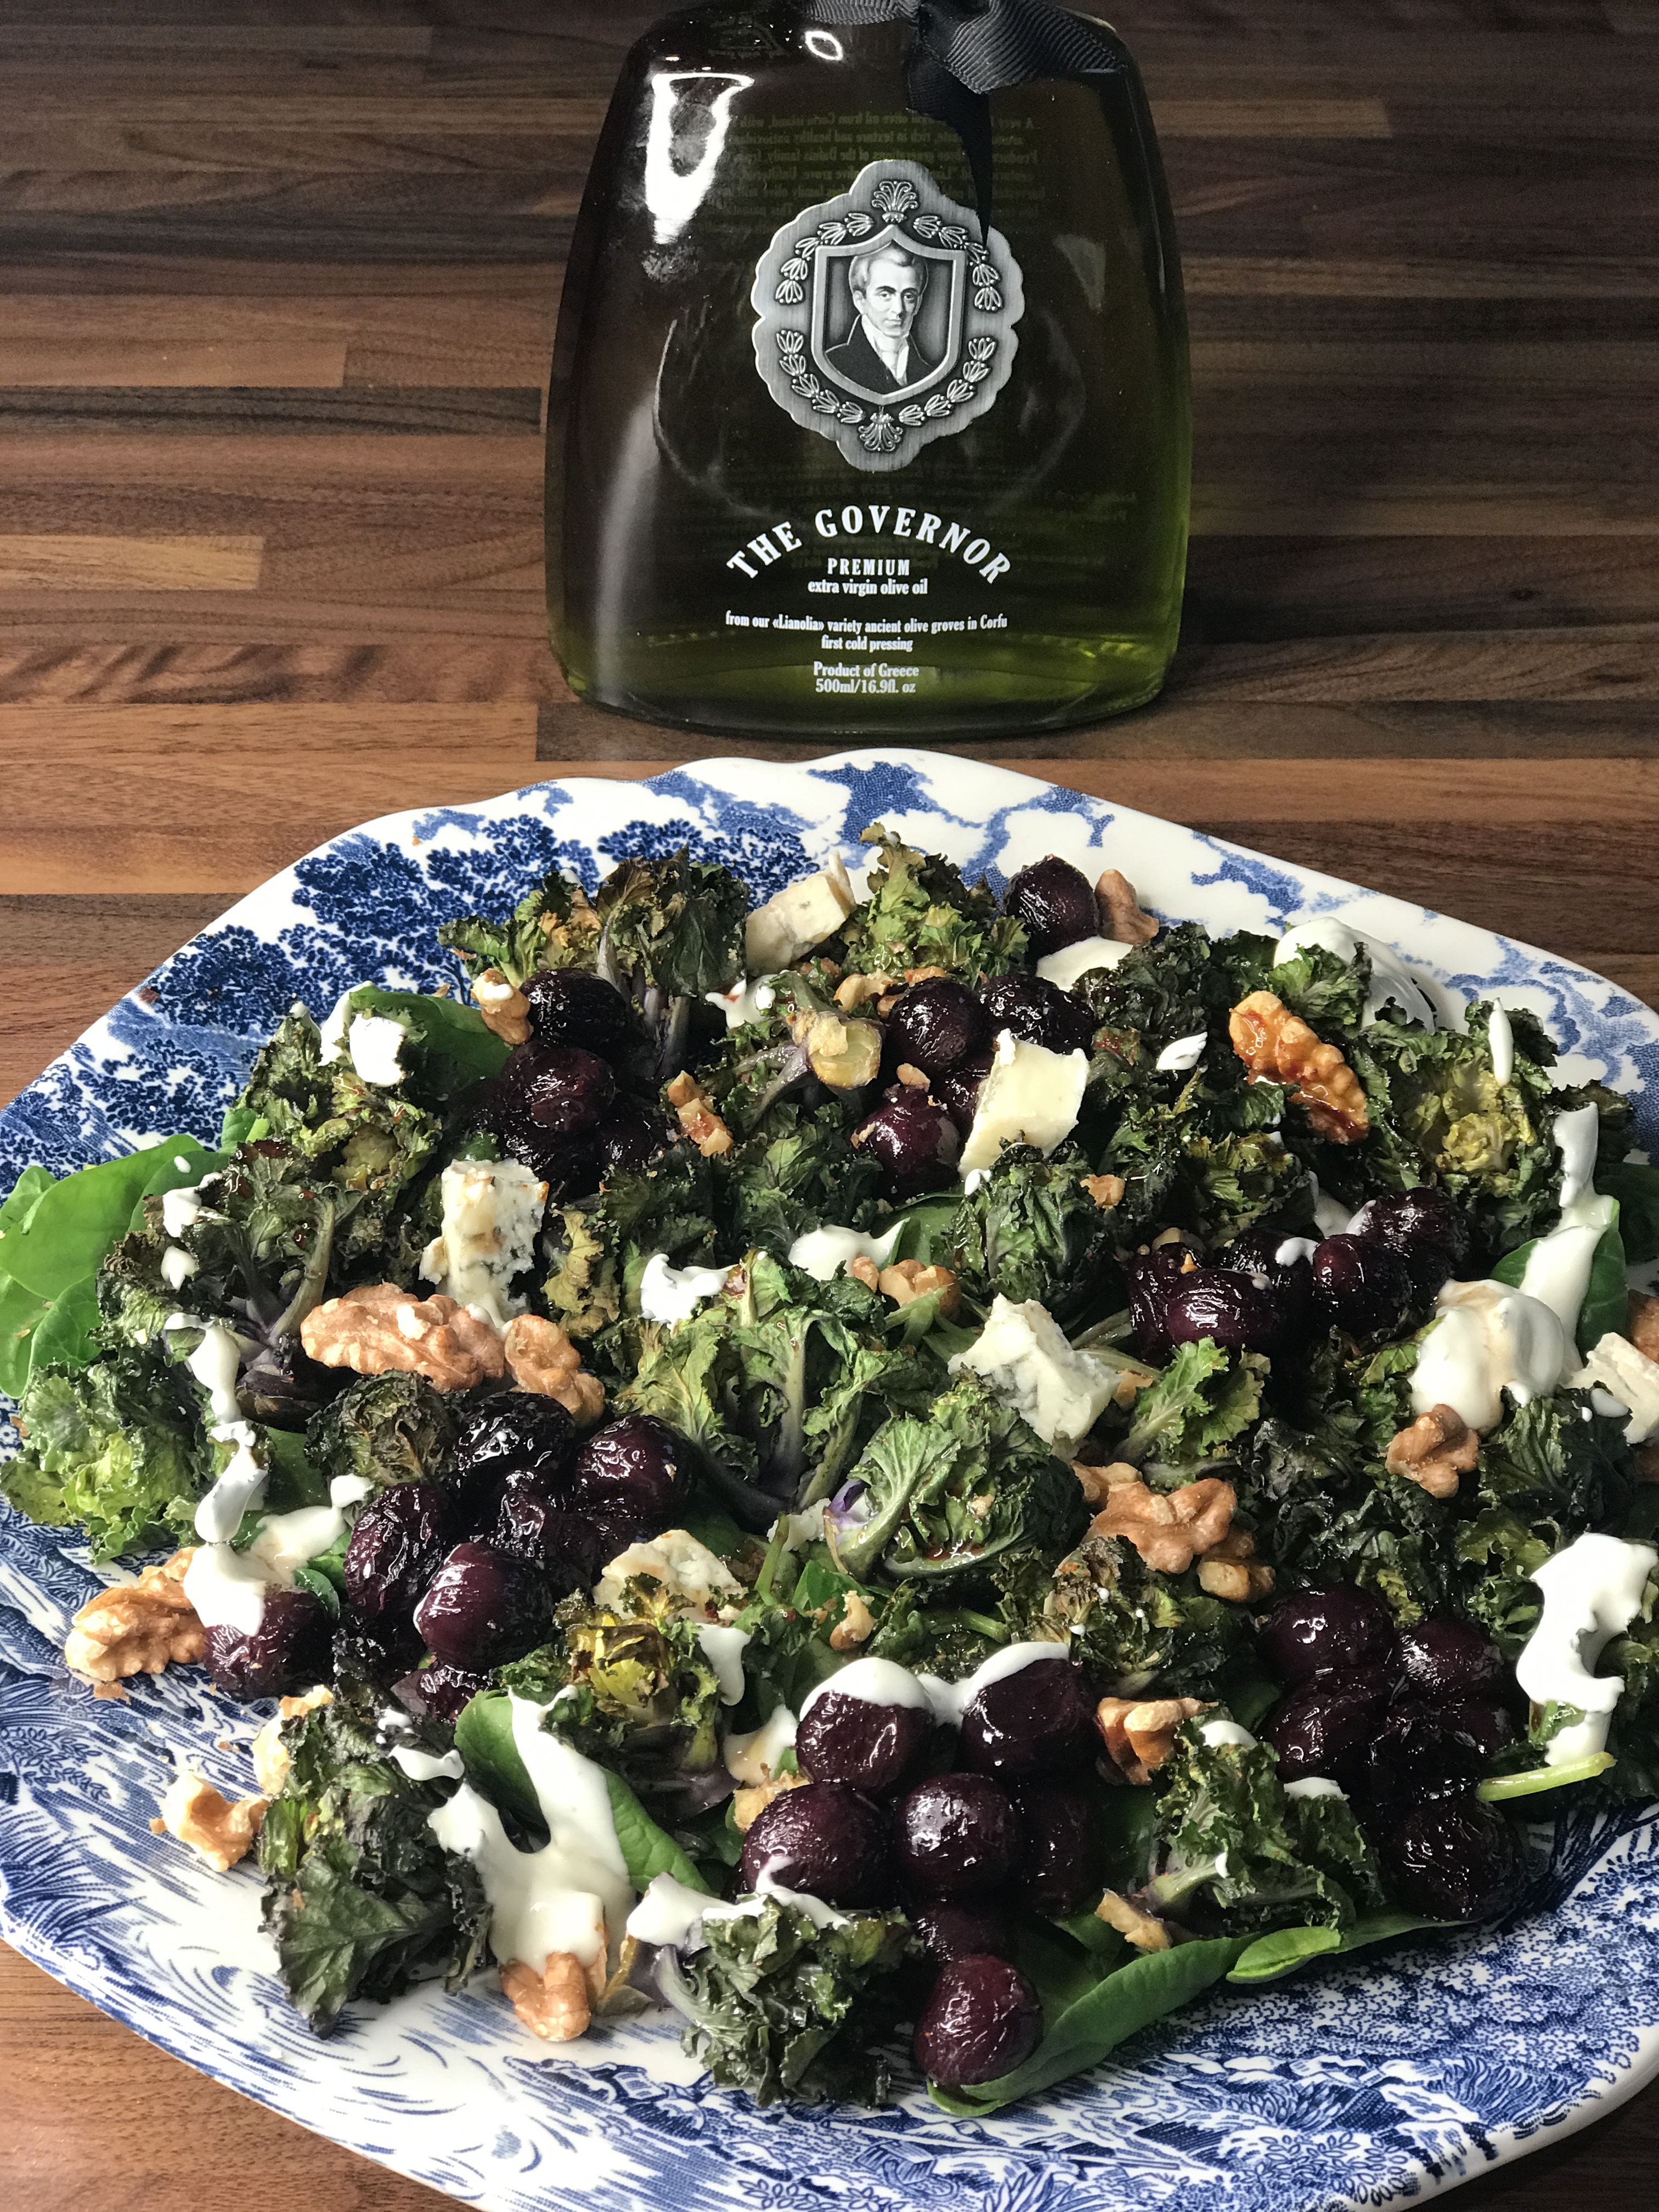 Kalette salad with roasted grapes, walnuts and a healthier blue cheese dressing